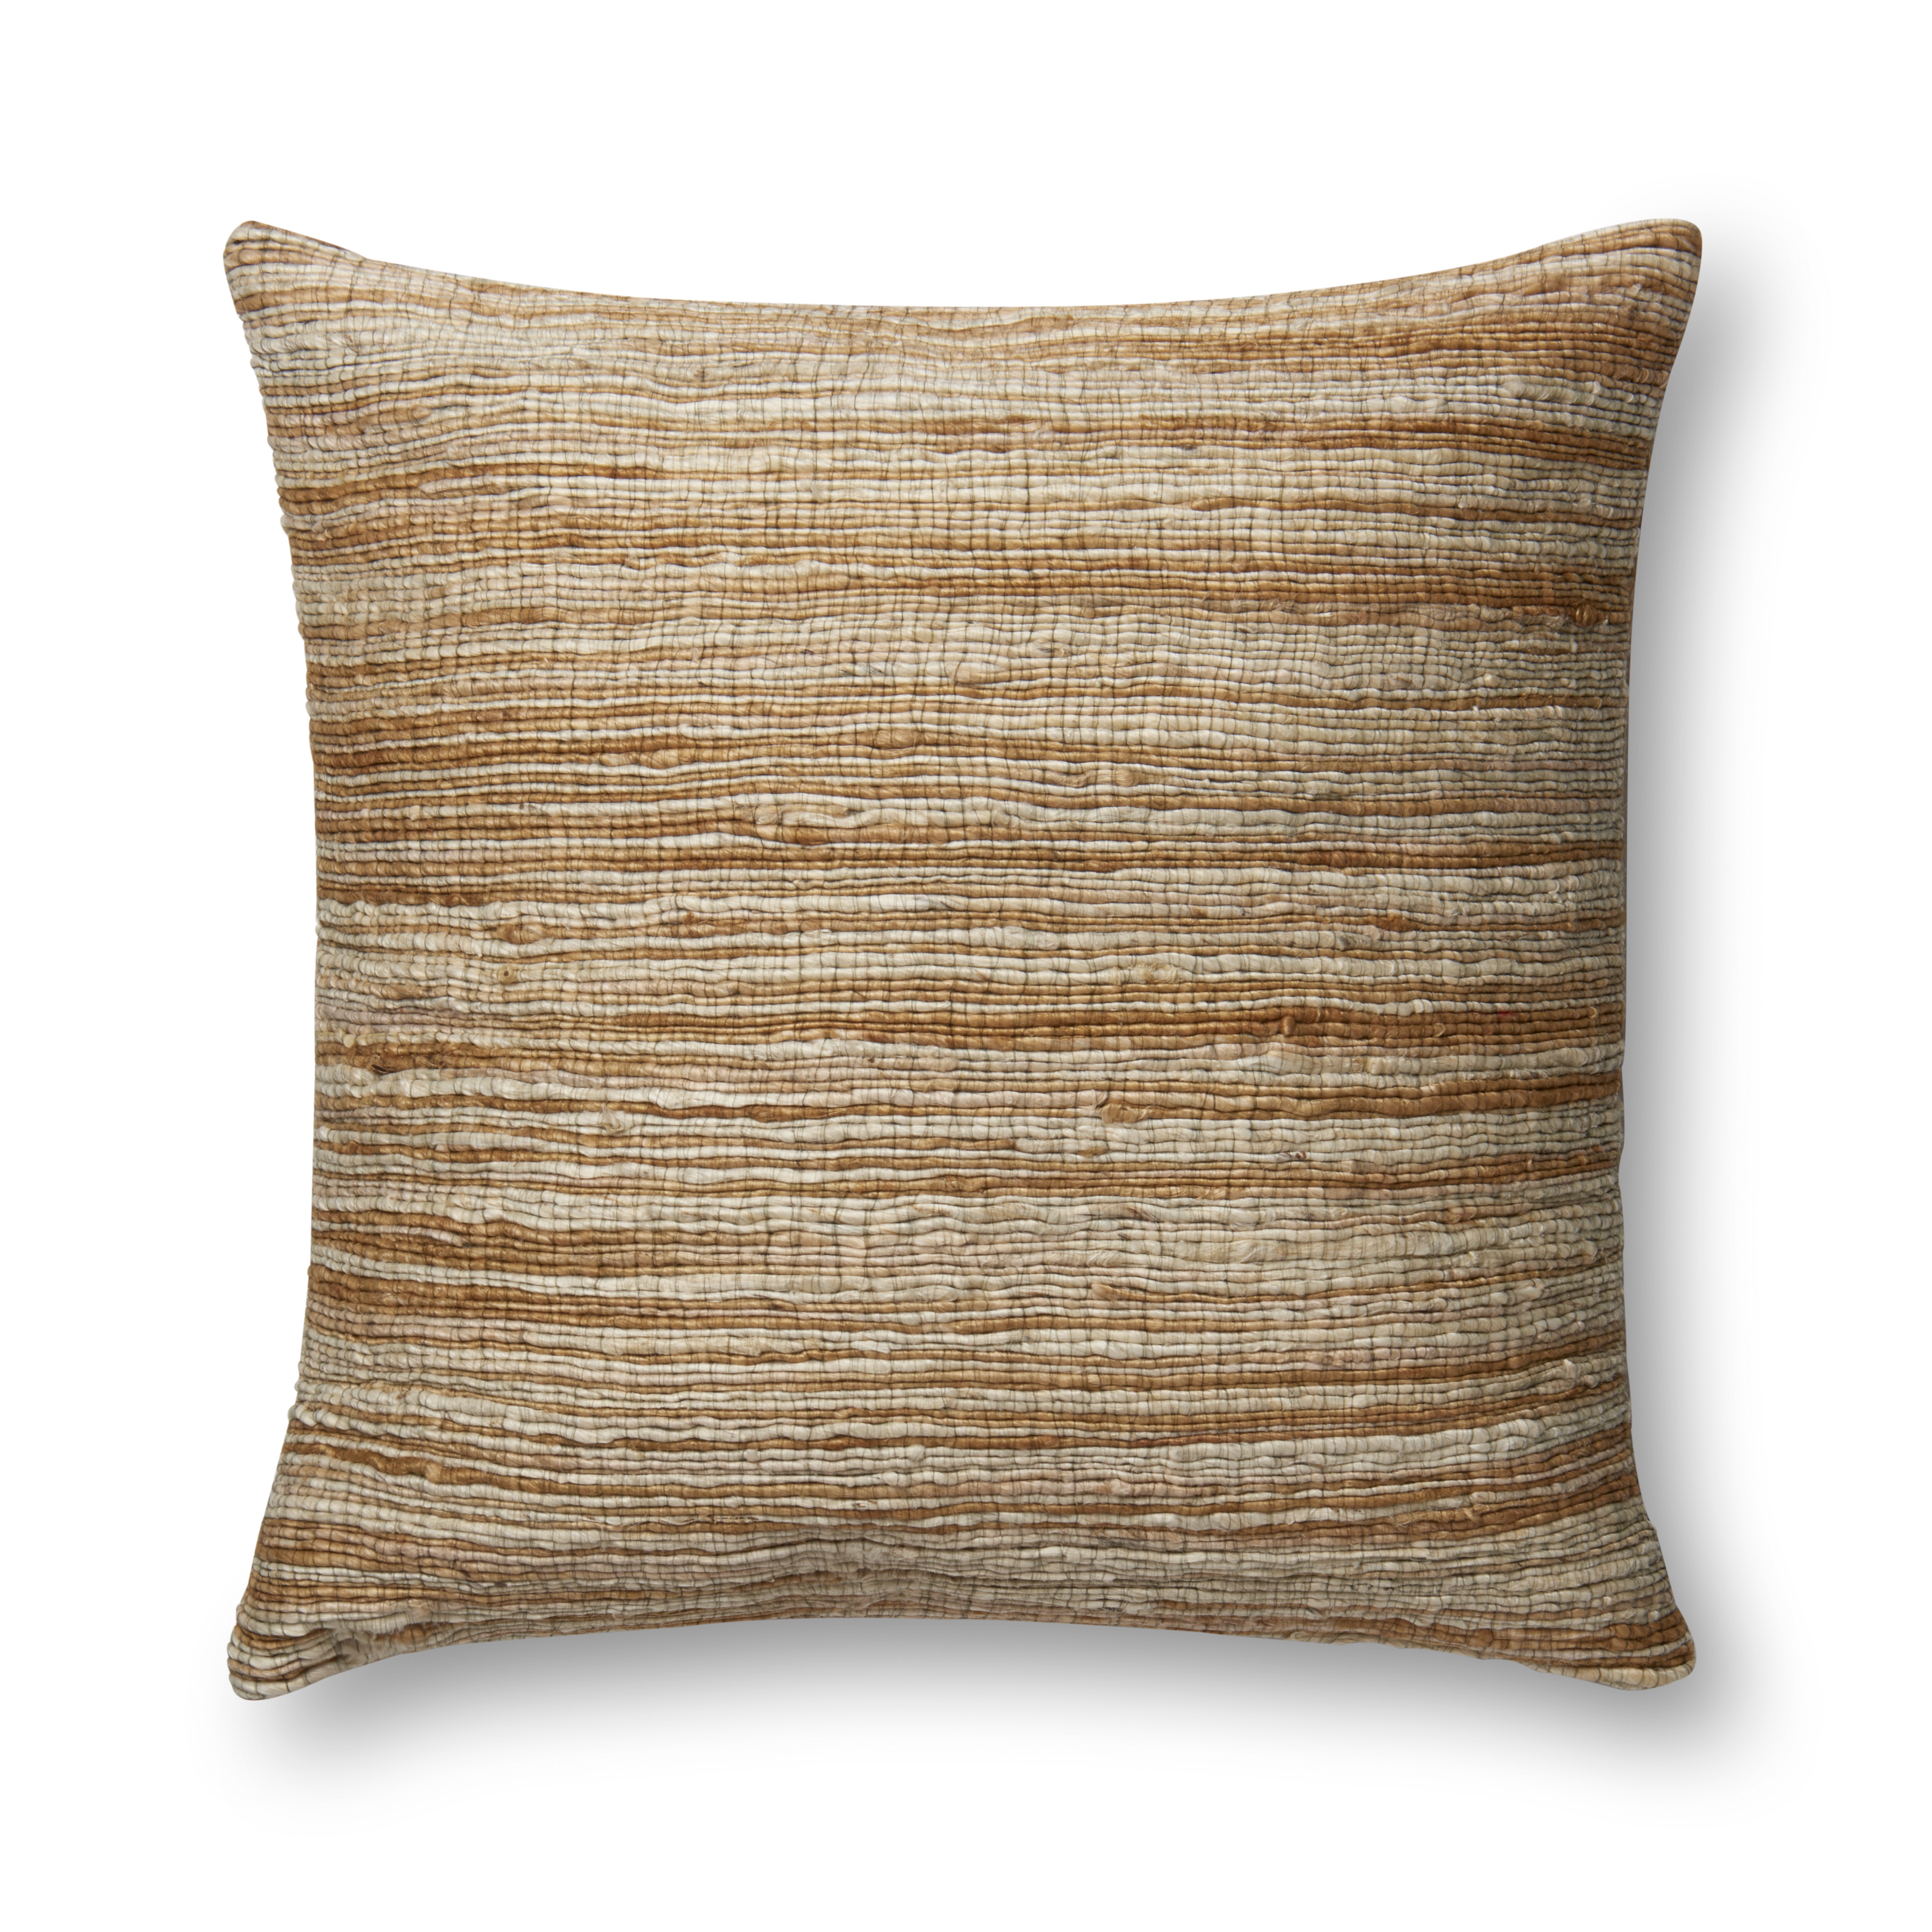 ED Ellen DeGeneres Crafted by Loloi Pillows P4014 Camel / Beige 22" x 22" Cover Only - Image 0